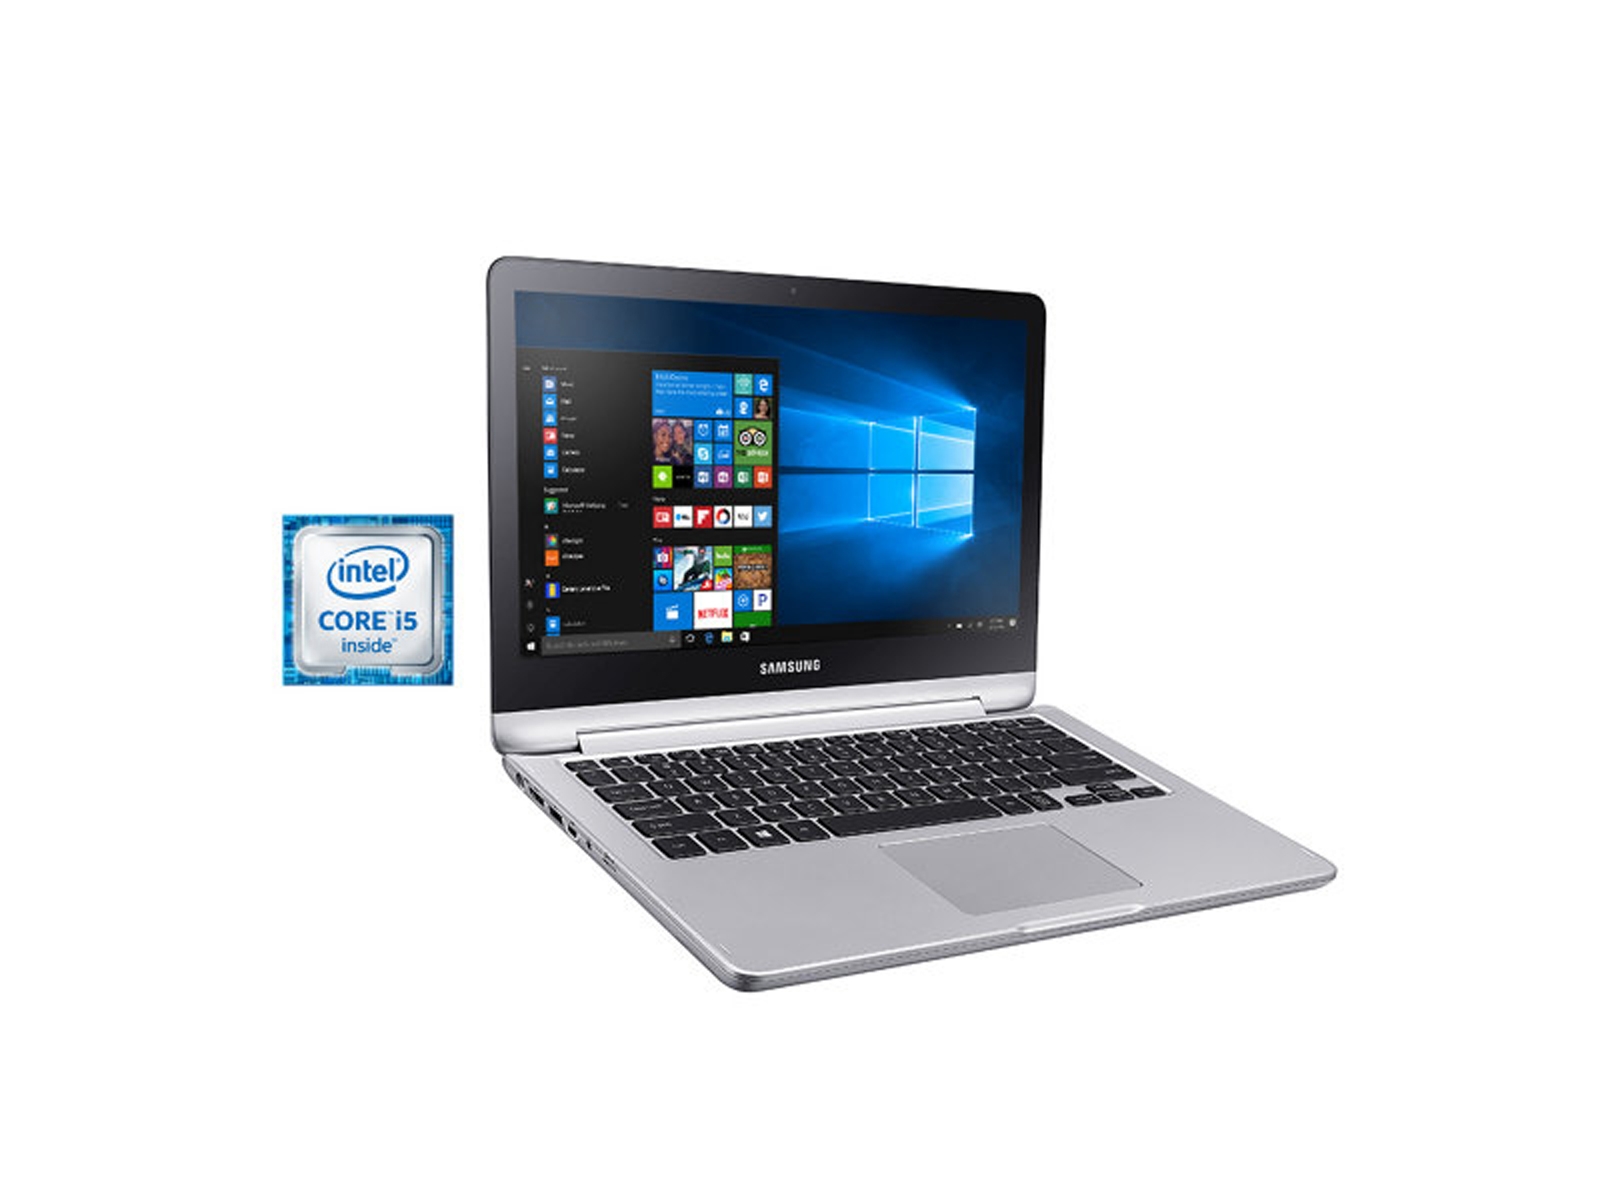 Thumbnail image of Notebook 7 spin 13.3” (12GB RAM)